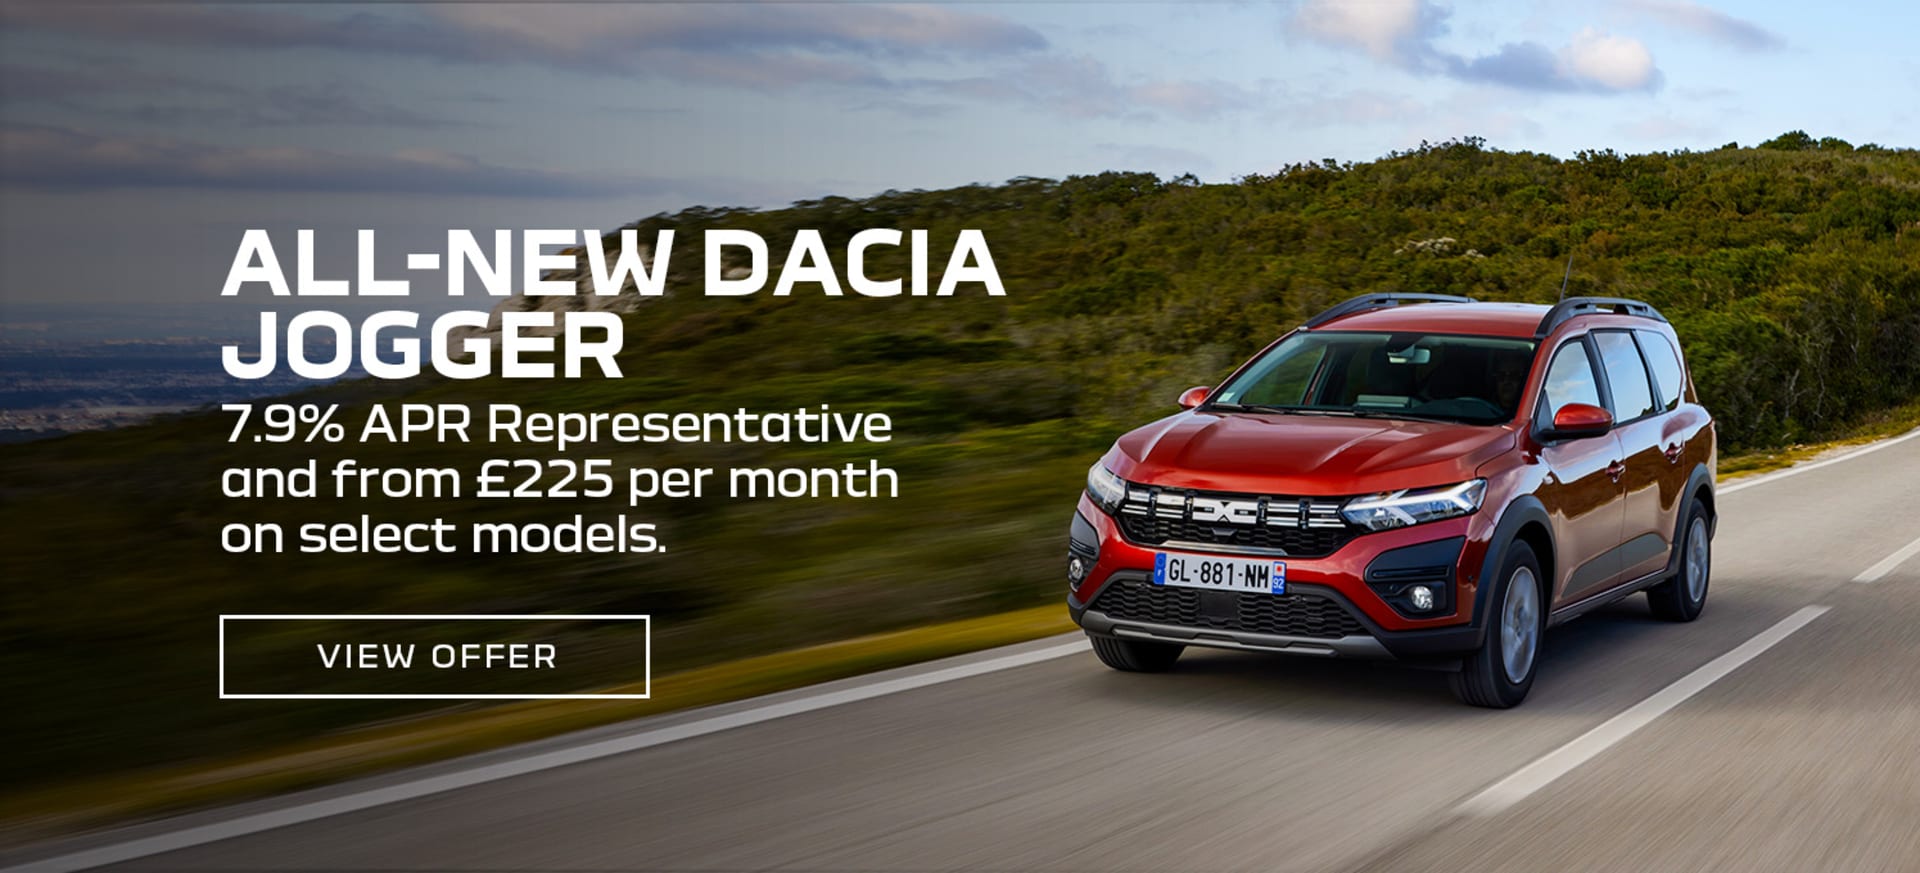 All New Dacia Jogger from £225 per month 7.9% APR